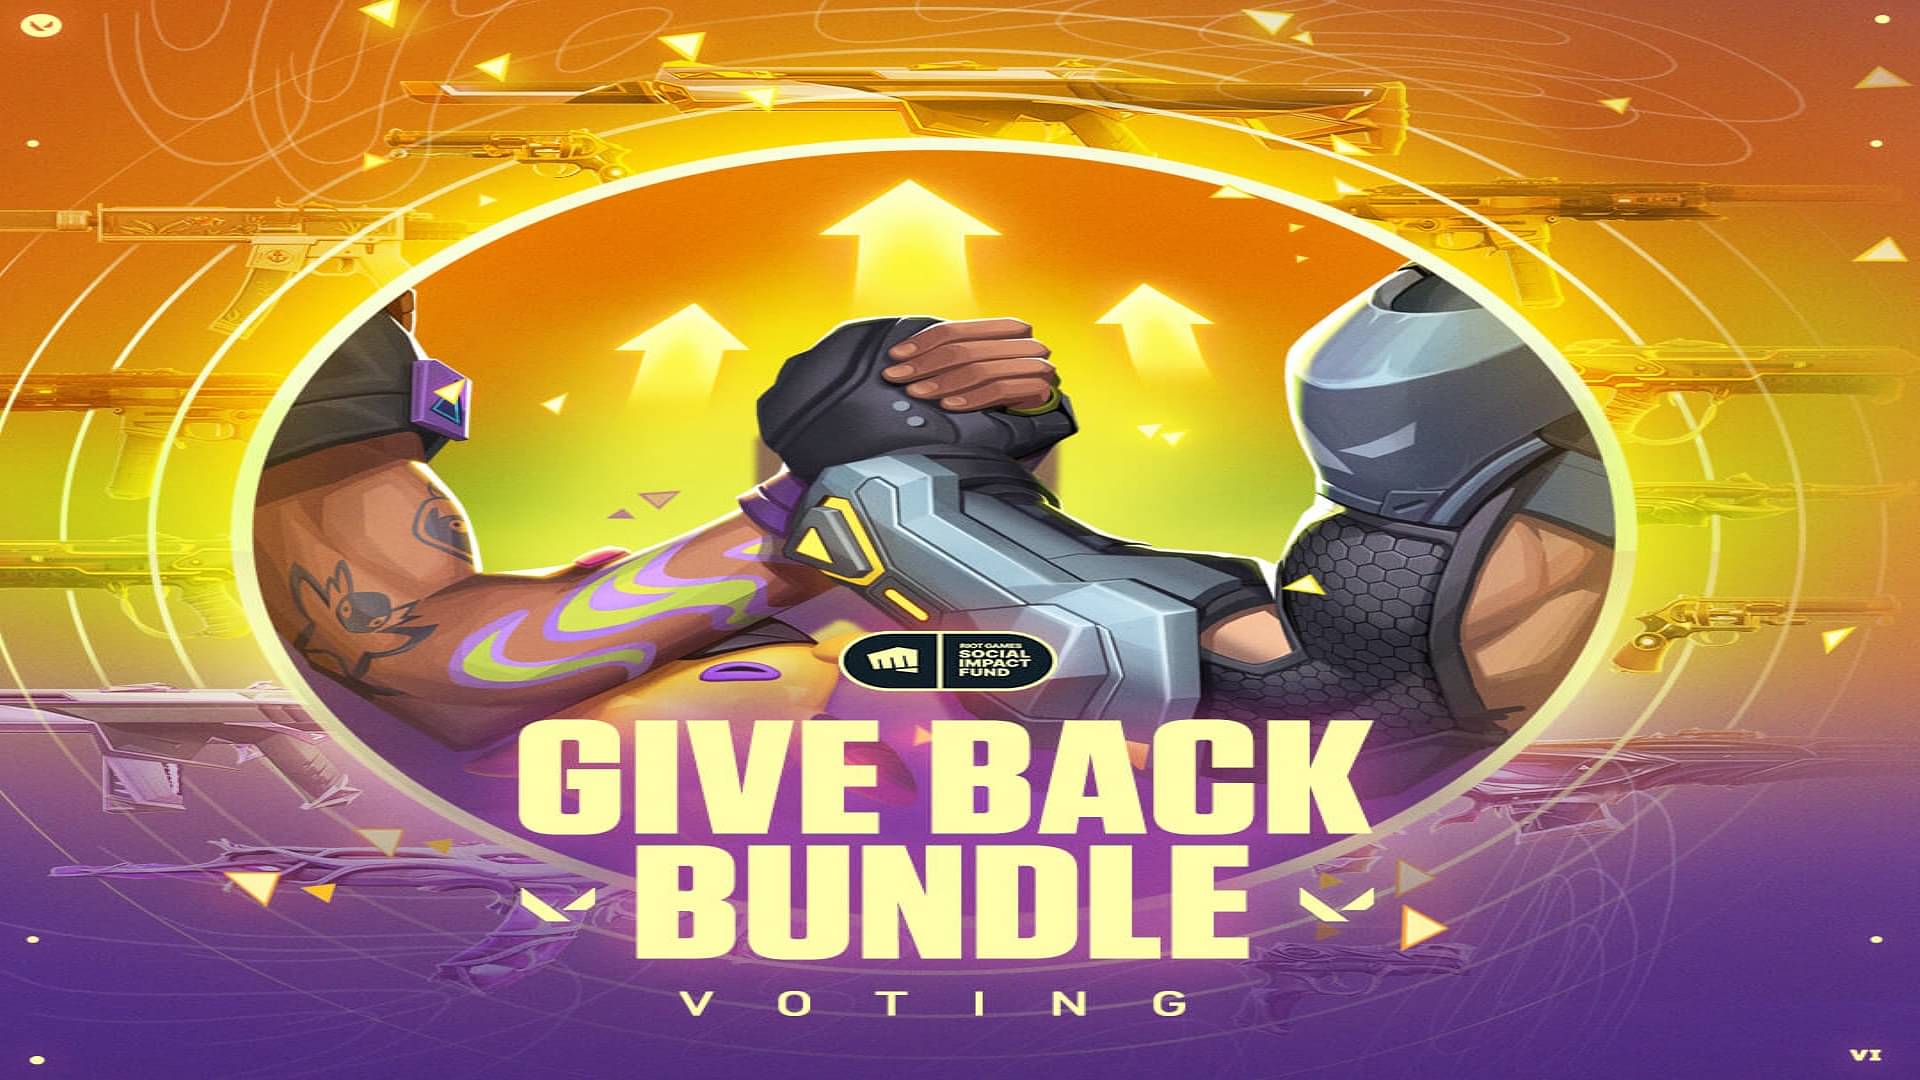 Valorant Karma: Give Back Bundle Details; How to Vote, Skins and More